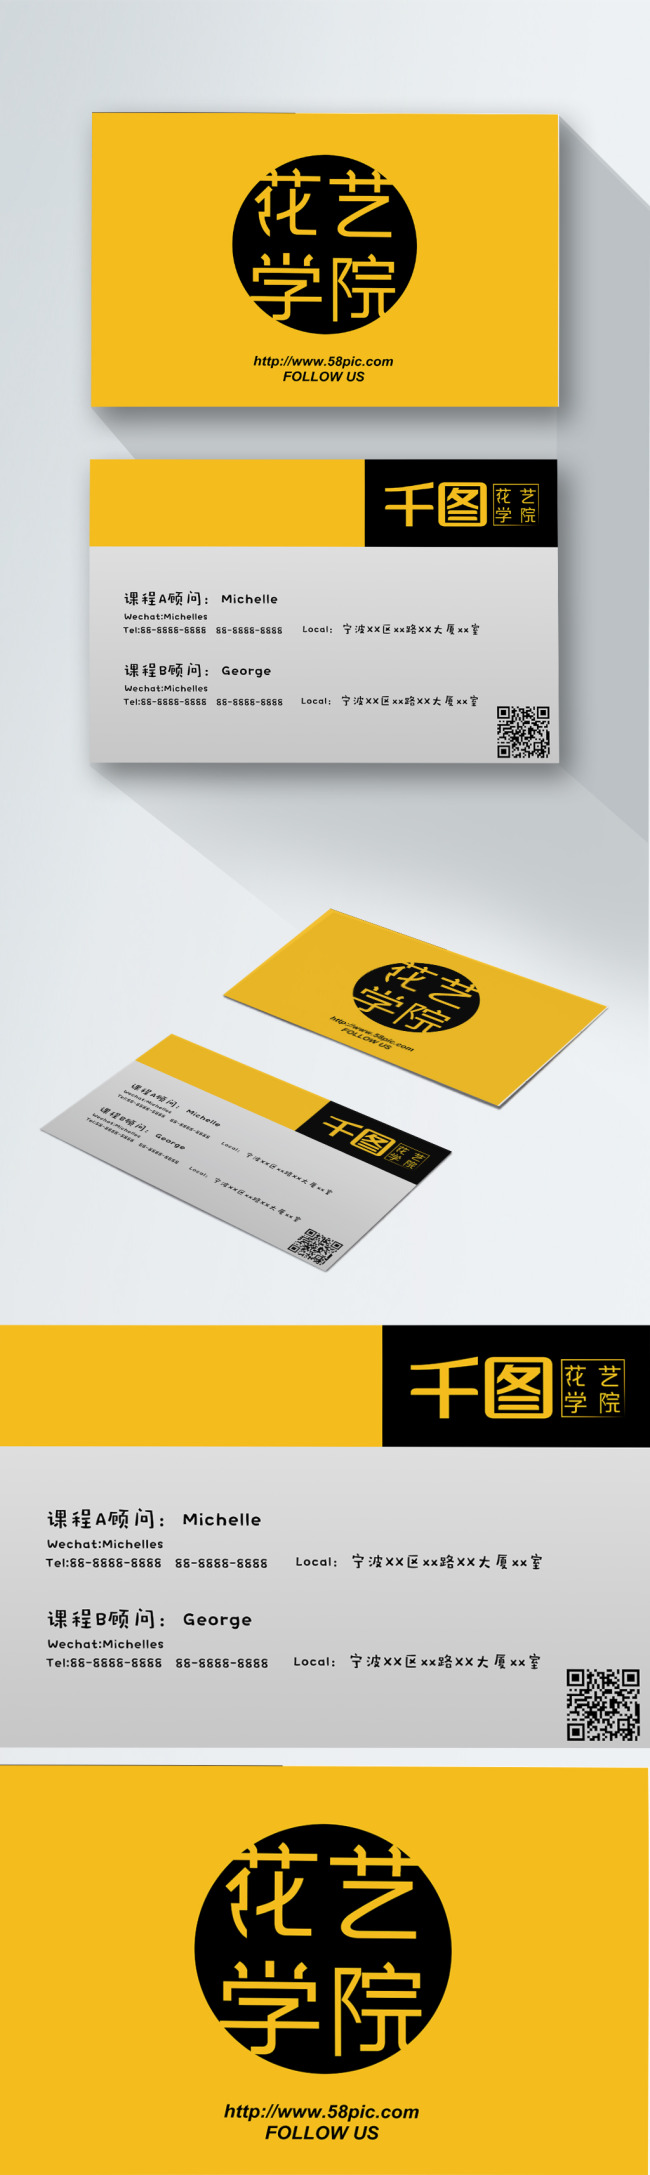 Download Business Card Of Creative Yellow Fried Egg Template Image Picture Free Download 400139752 Lovepik Com PSD Mockup Templates